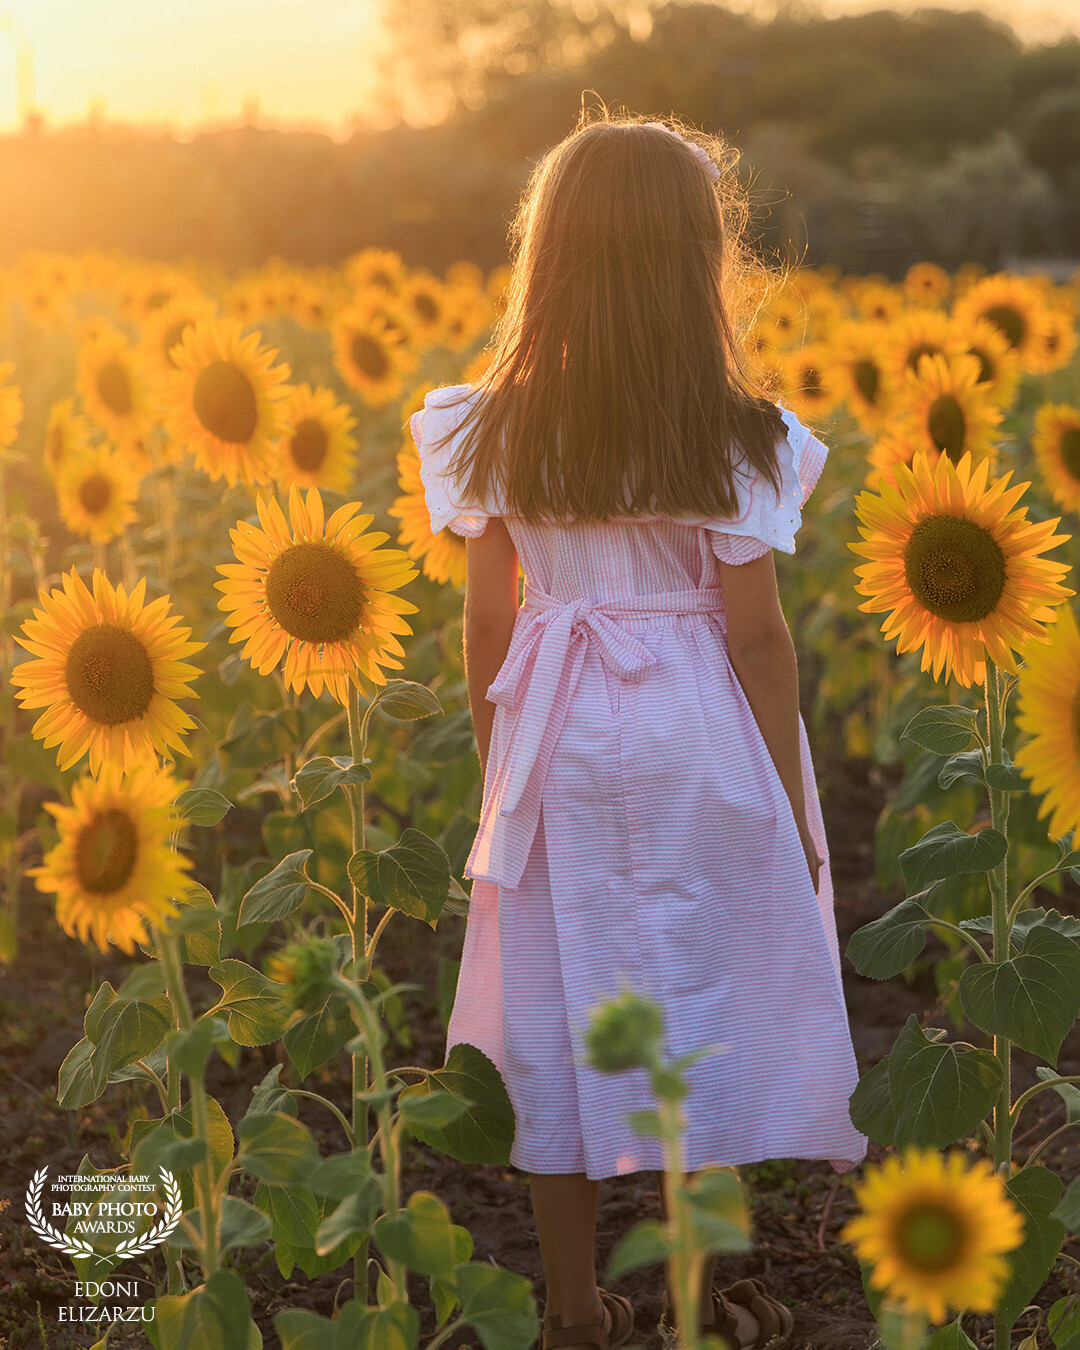 My little girl surrounded by sunflowers! In love with this photo! A great afternoon with this girl!